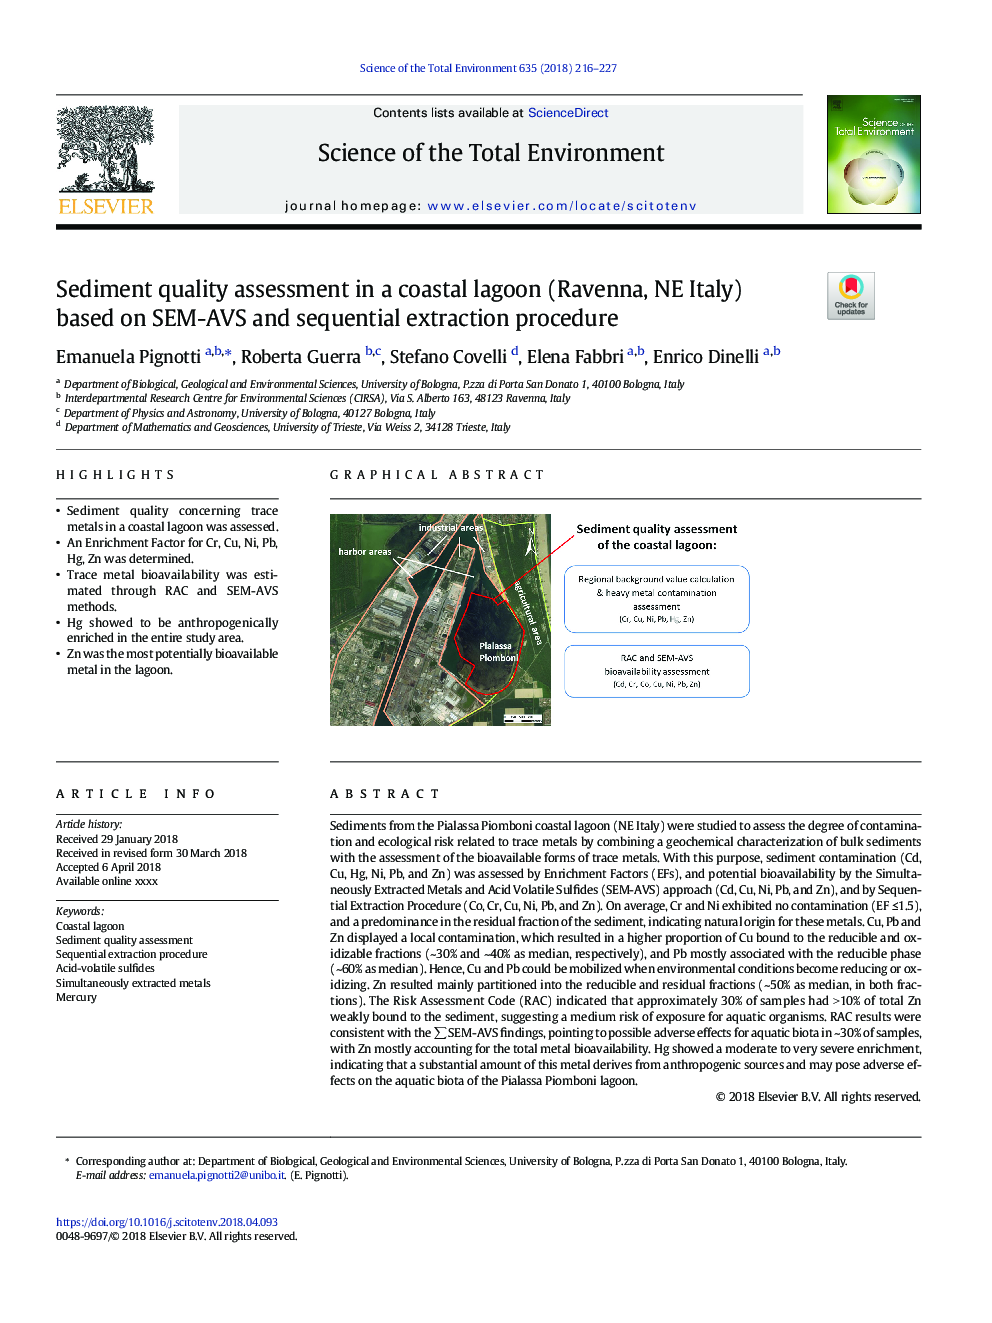 Sediment quality assessment in a coastal lagoon (Ravenna, NE Italy) based on SEM-AVS and sequential extraction procedure